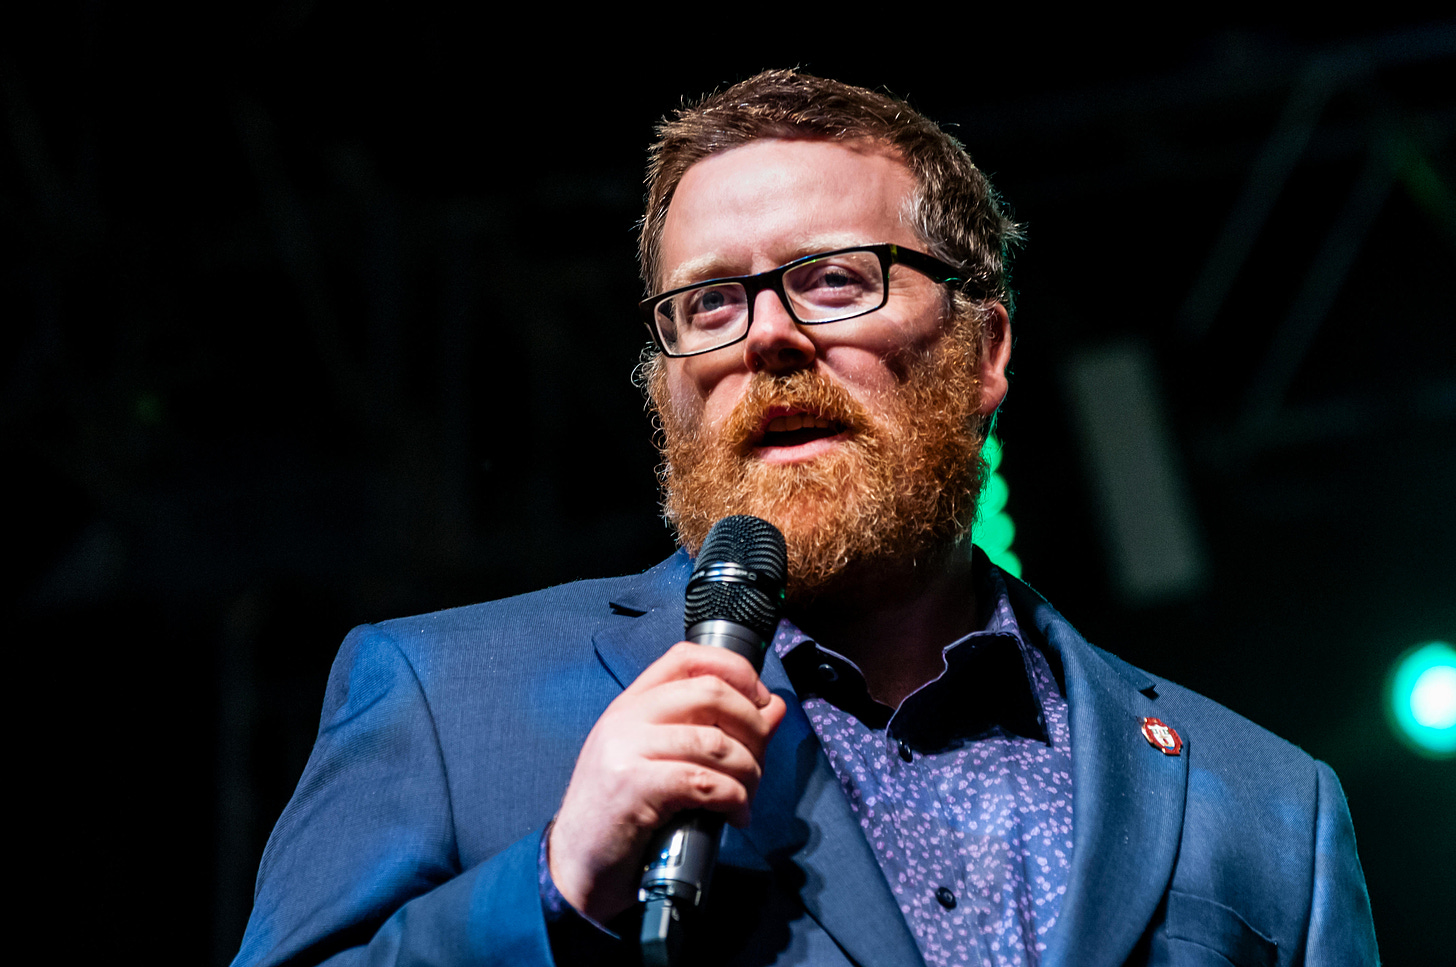 “Comedian” Frankie Boyle made “rape joke” about Holly Willoughby